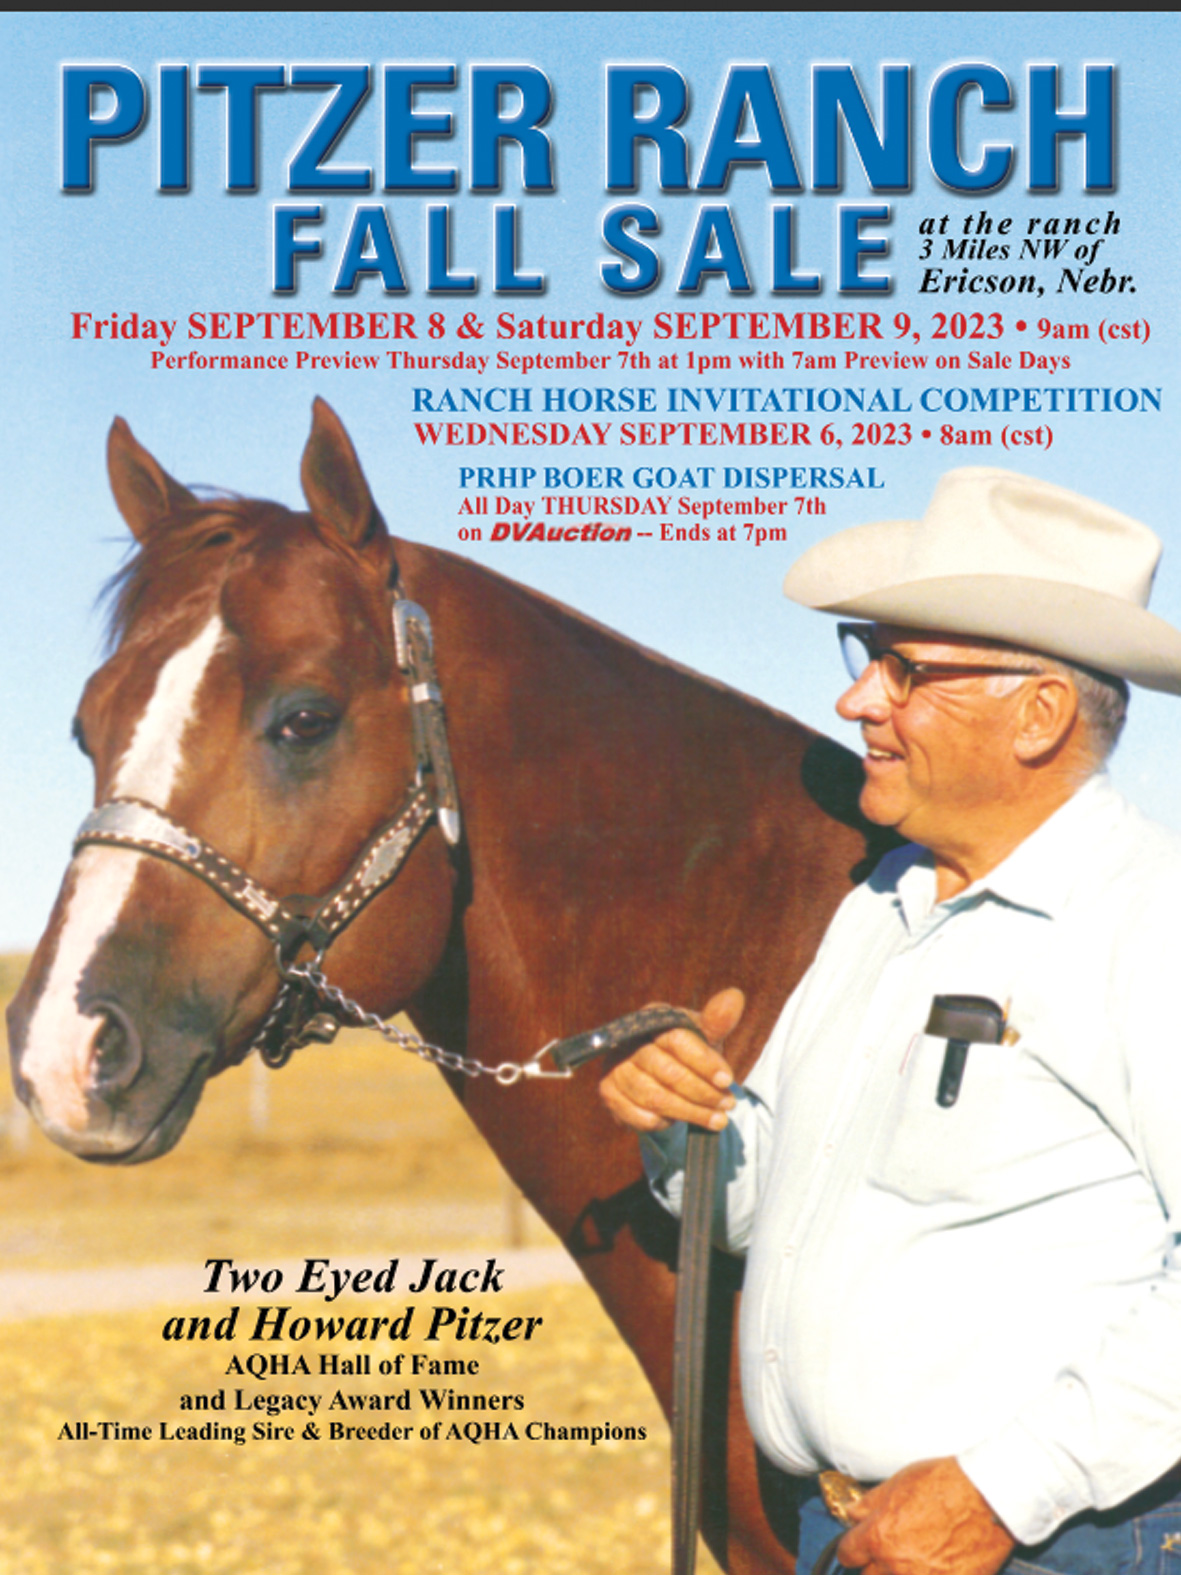 Event Ad for Pitzer Ranch Fall Sale